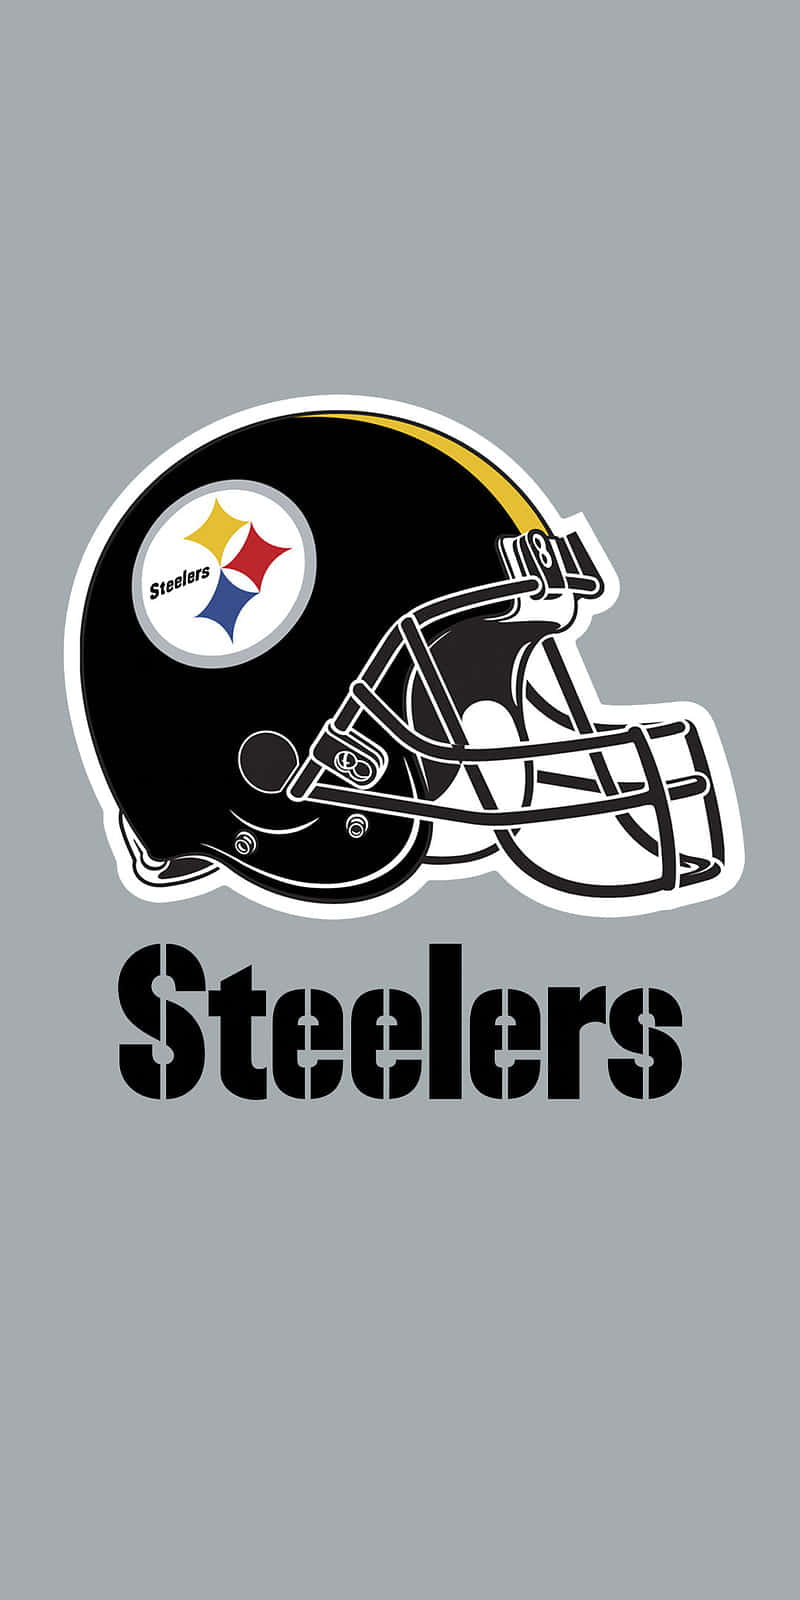 ‘Support Your Favourite Team with an NFL-Themed Steelers iPhone’ Wallpaper